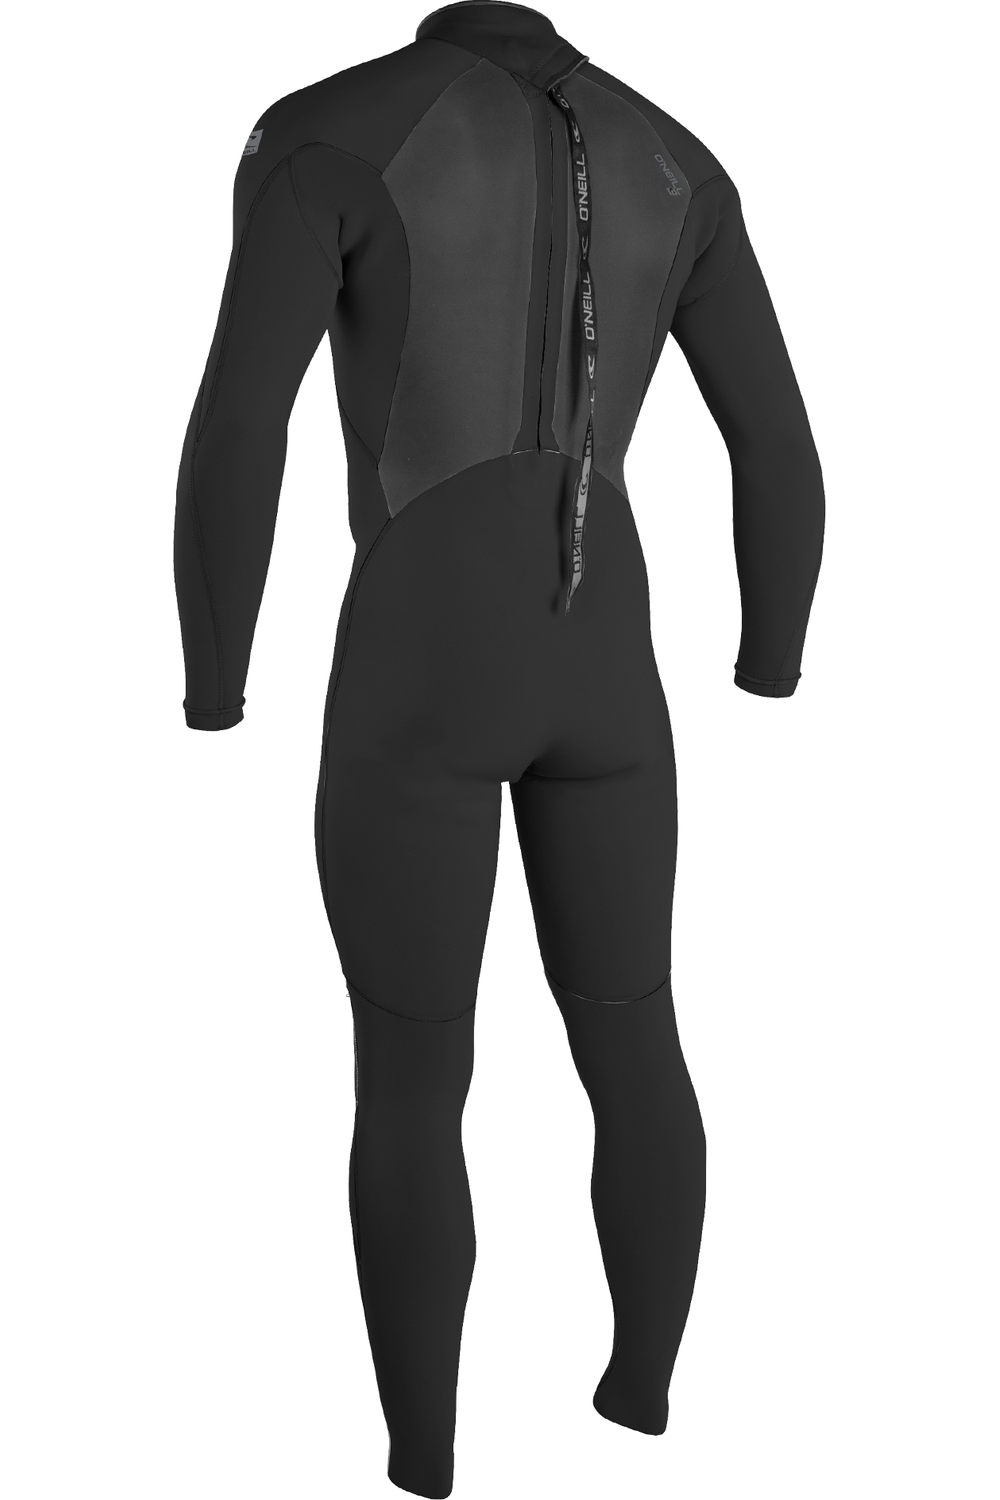 O'Neill Epic Wetsuit 3/2 With Back Zip In Black